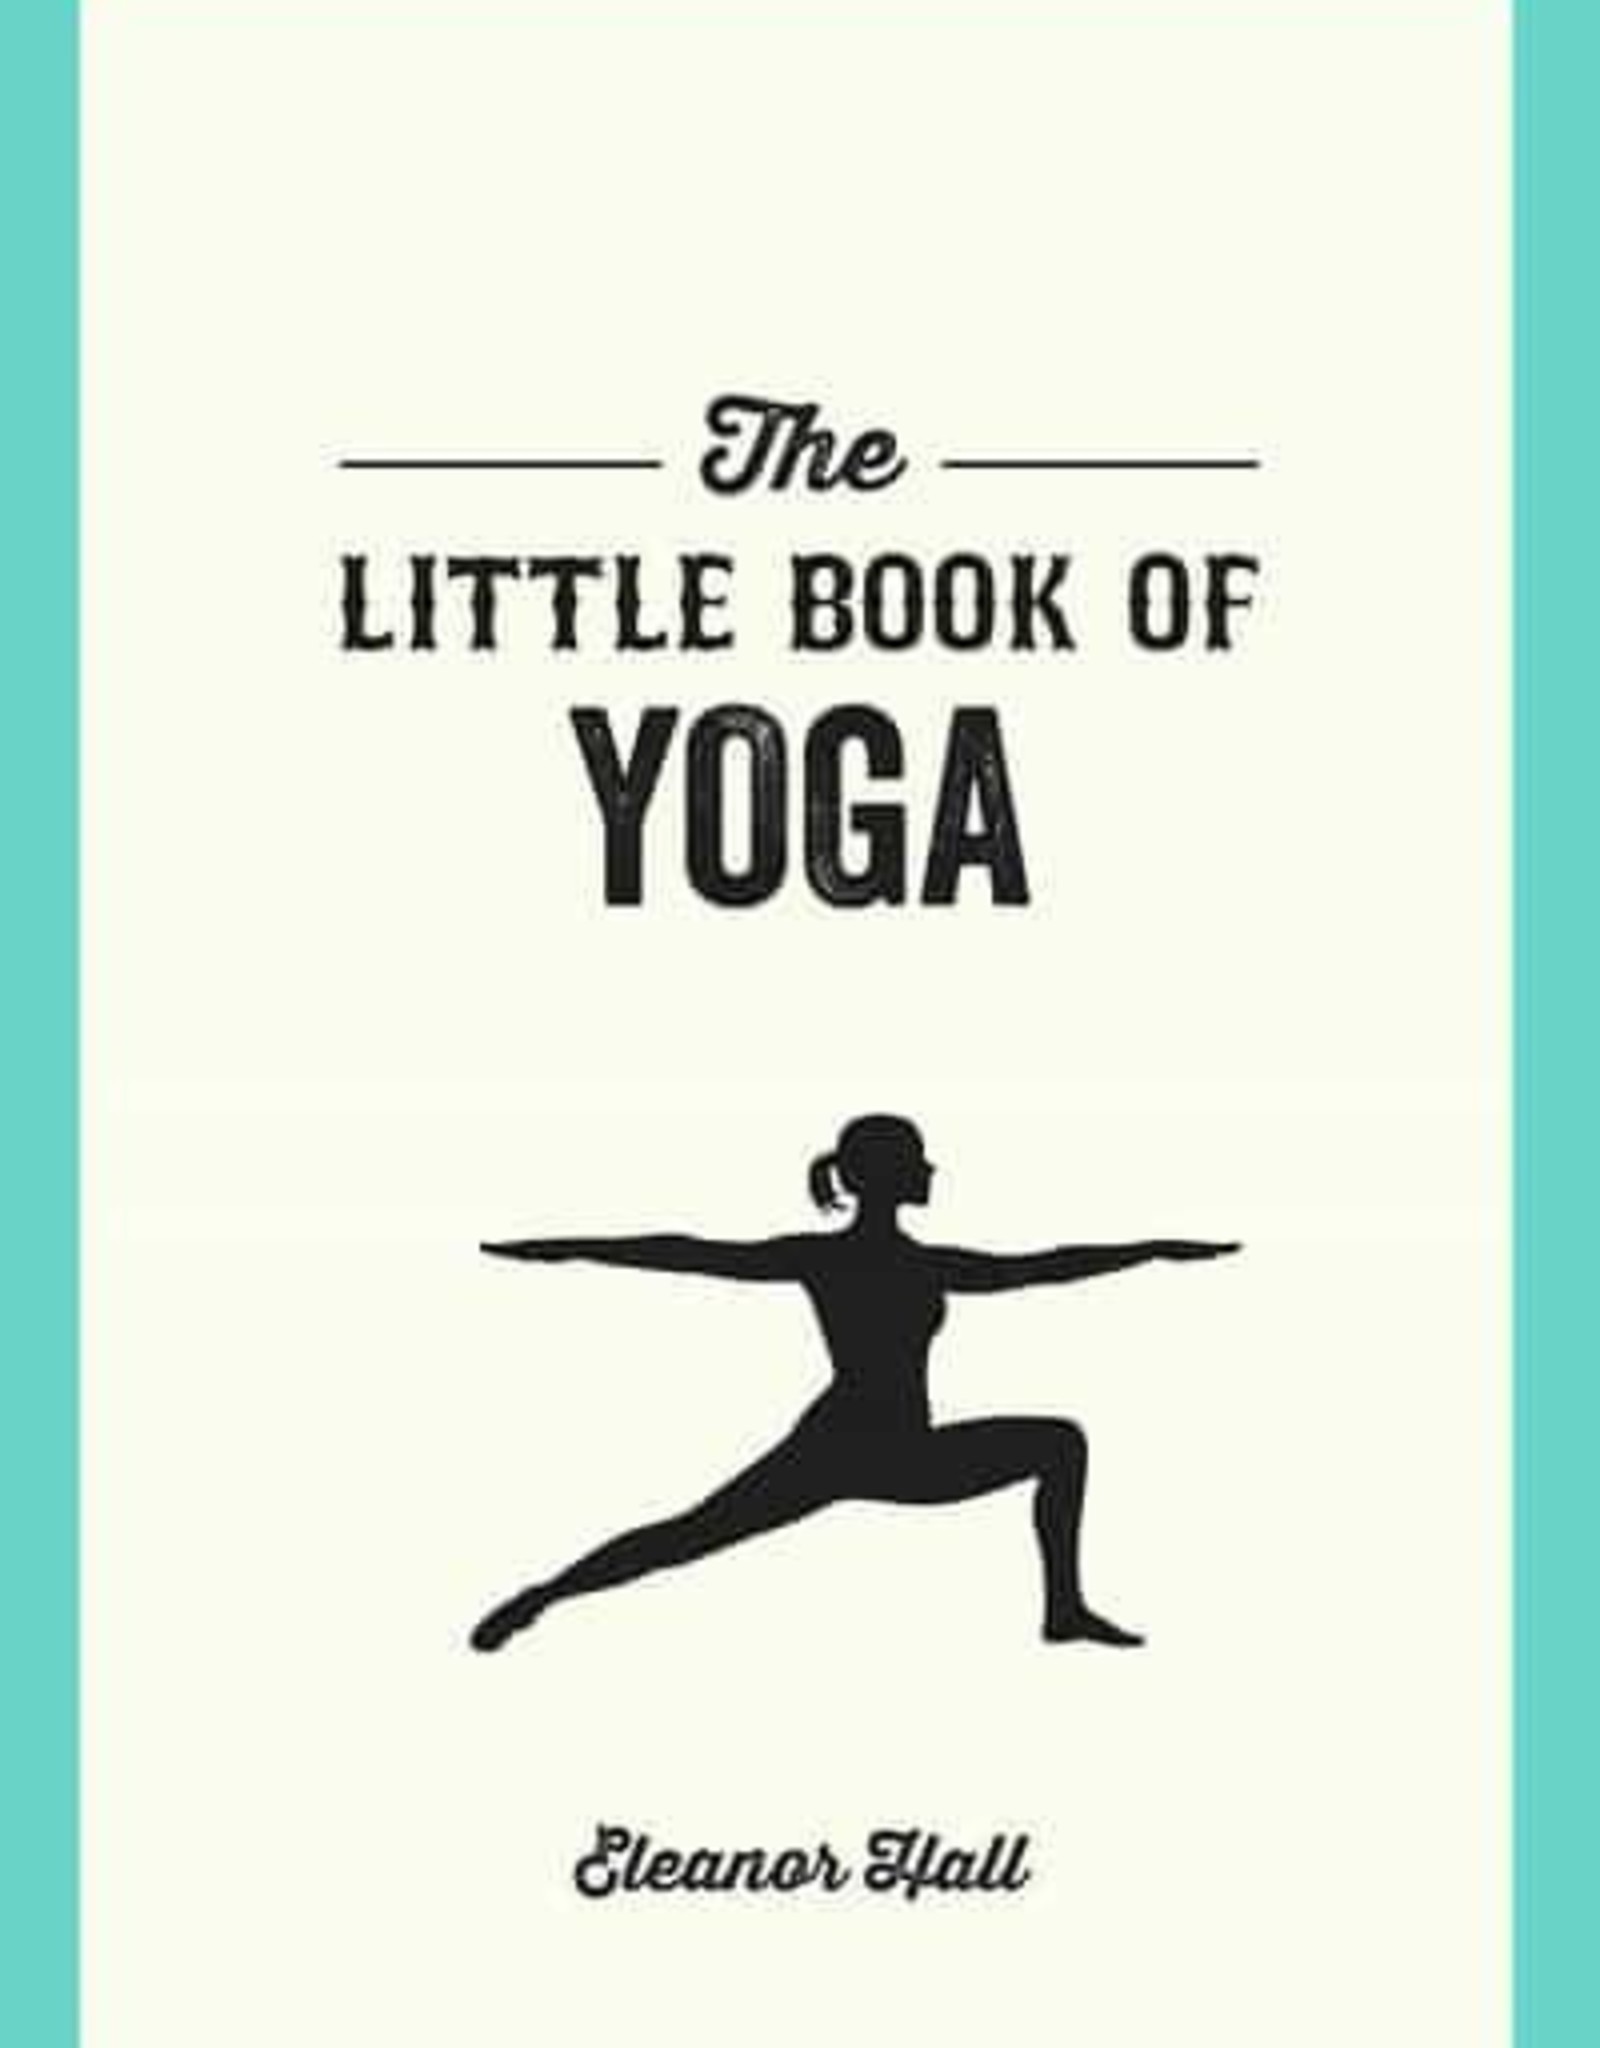 LITTLE BOOK OF YOGA (SUMMERSDALE)